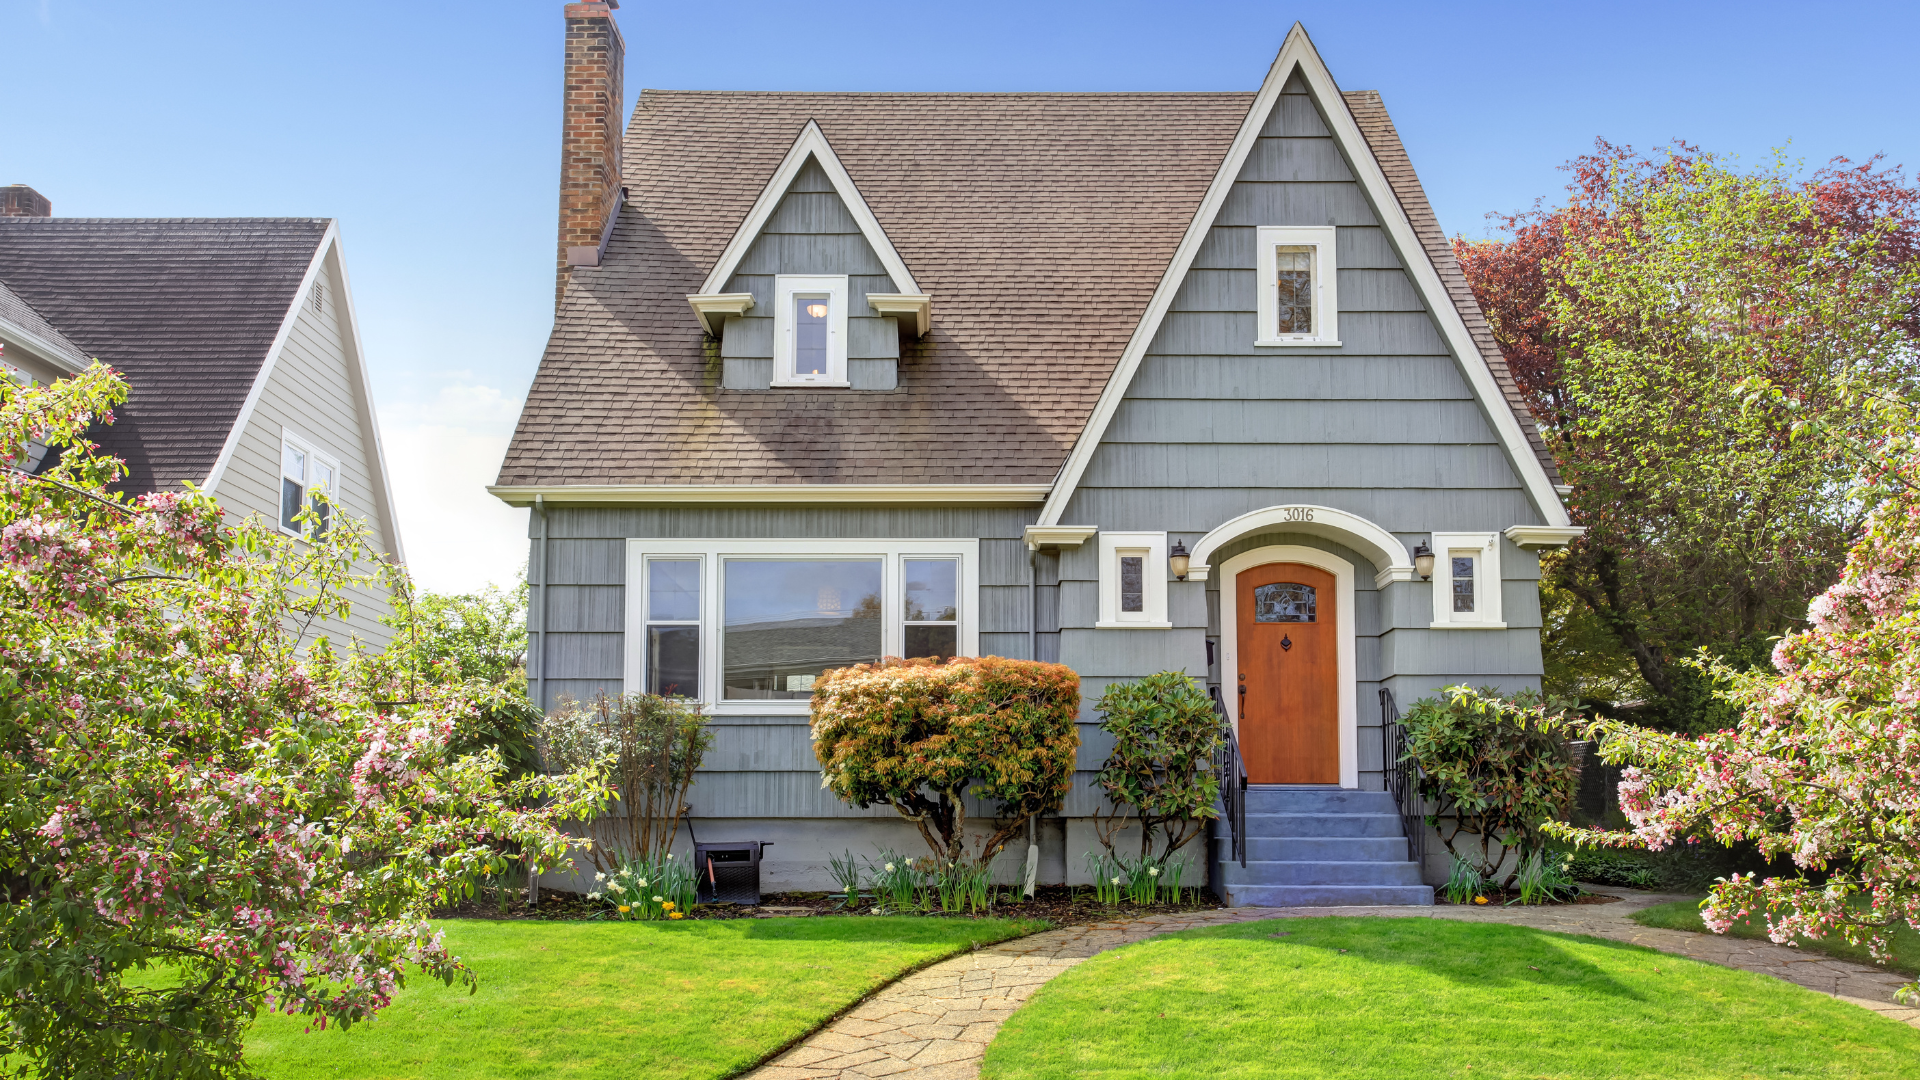 How to Boost Curb Appeal: Enhance Your Home’s Value